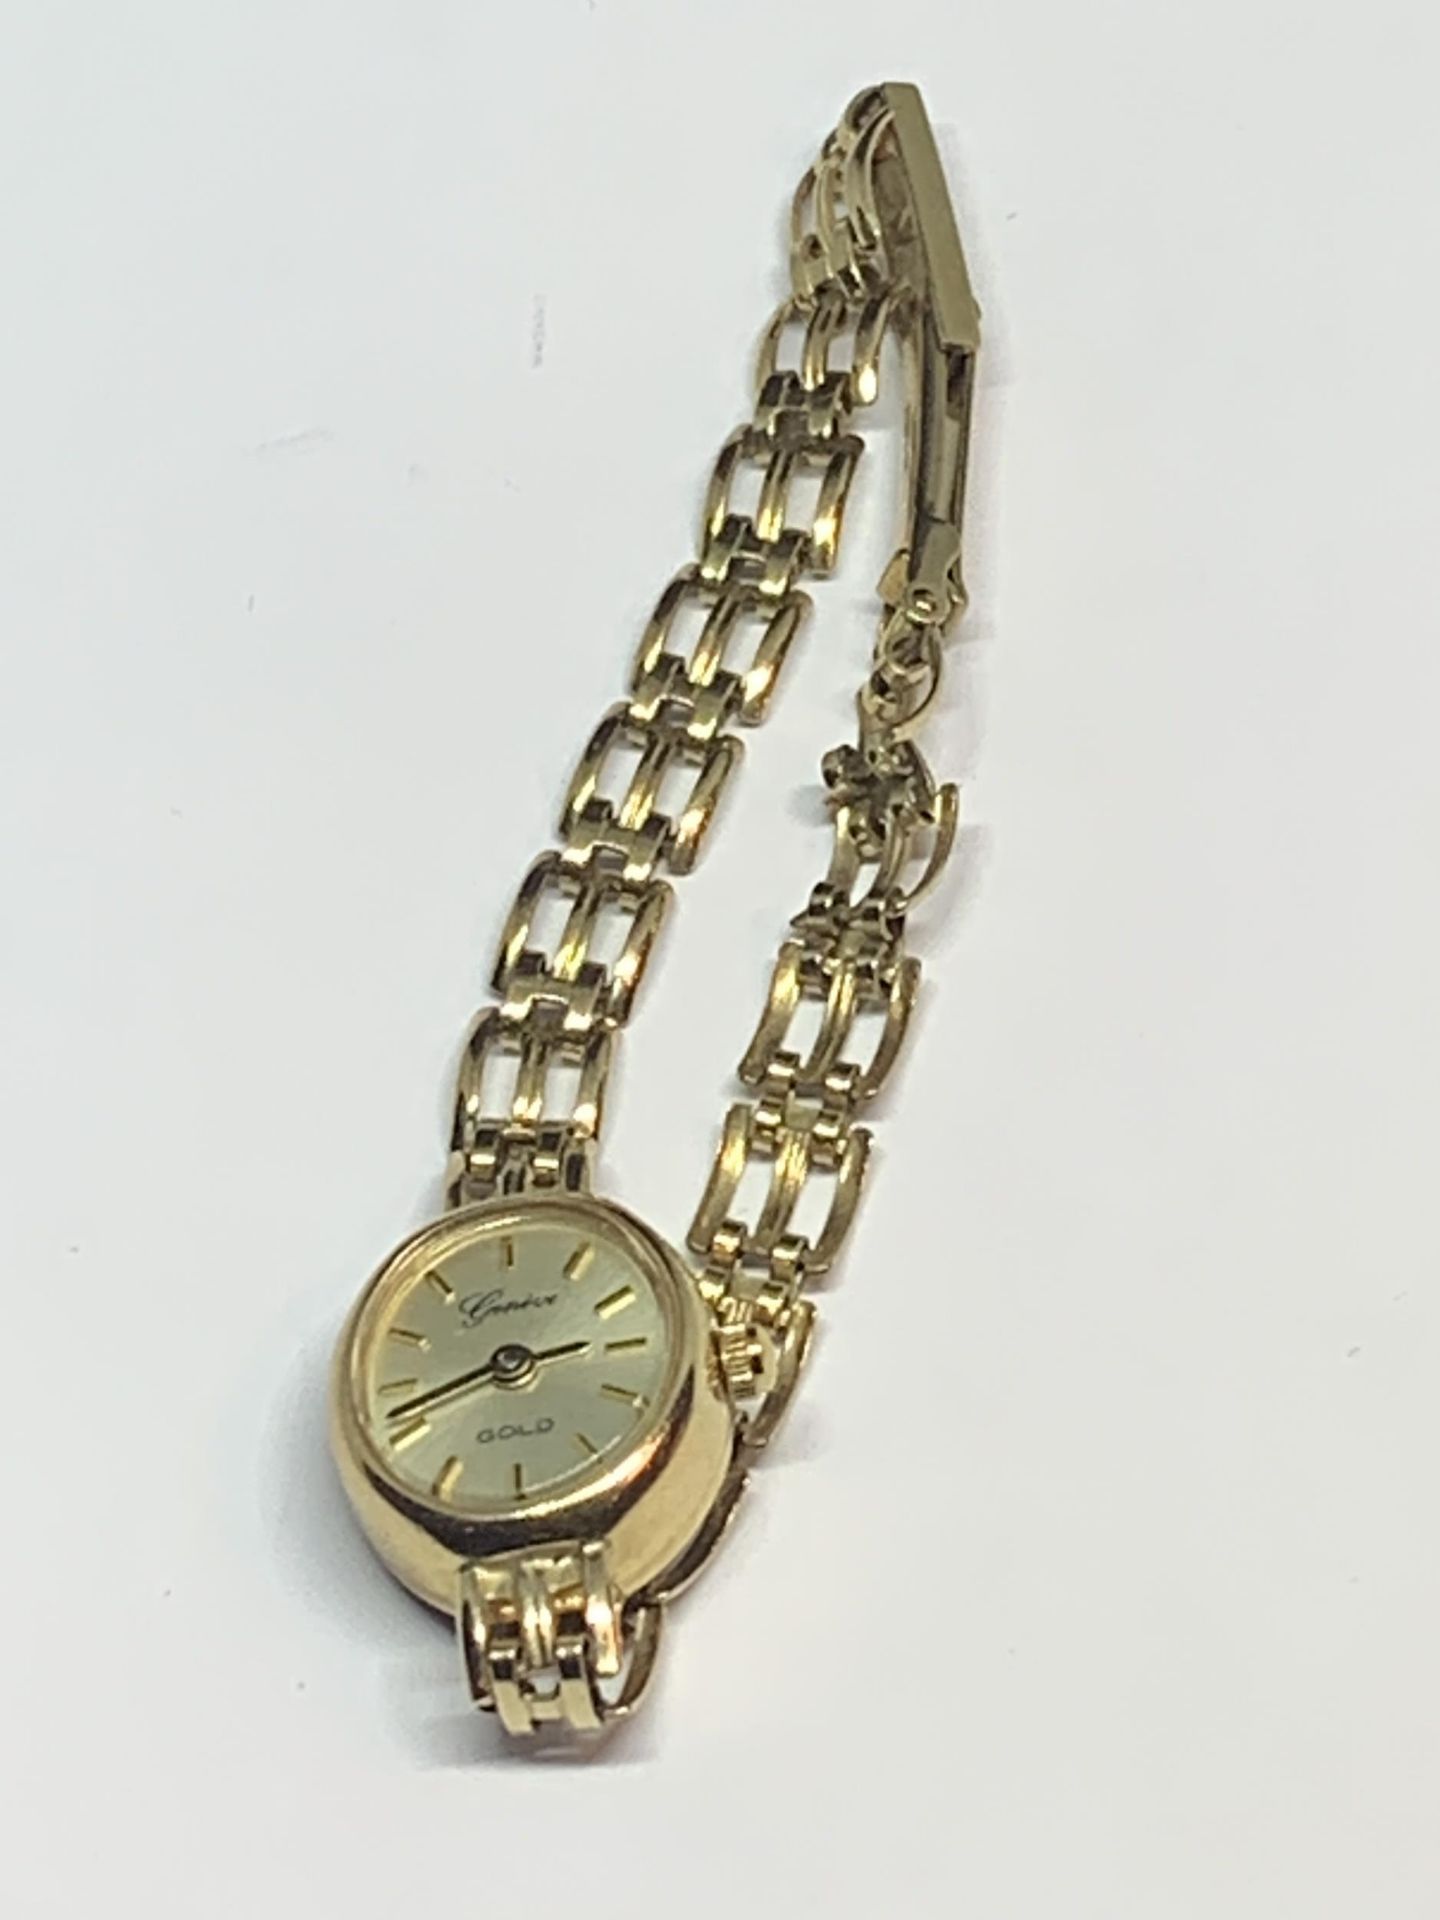 A GENEVE WRIST WATCH WITH 9 CARAT GOLD CASE AND STRAP GROSS WEIGHT 9 GRAMS